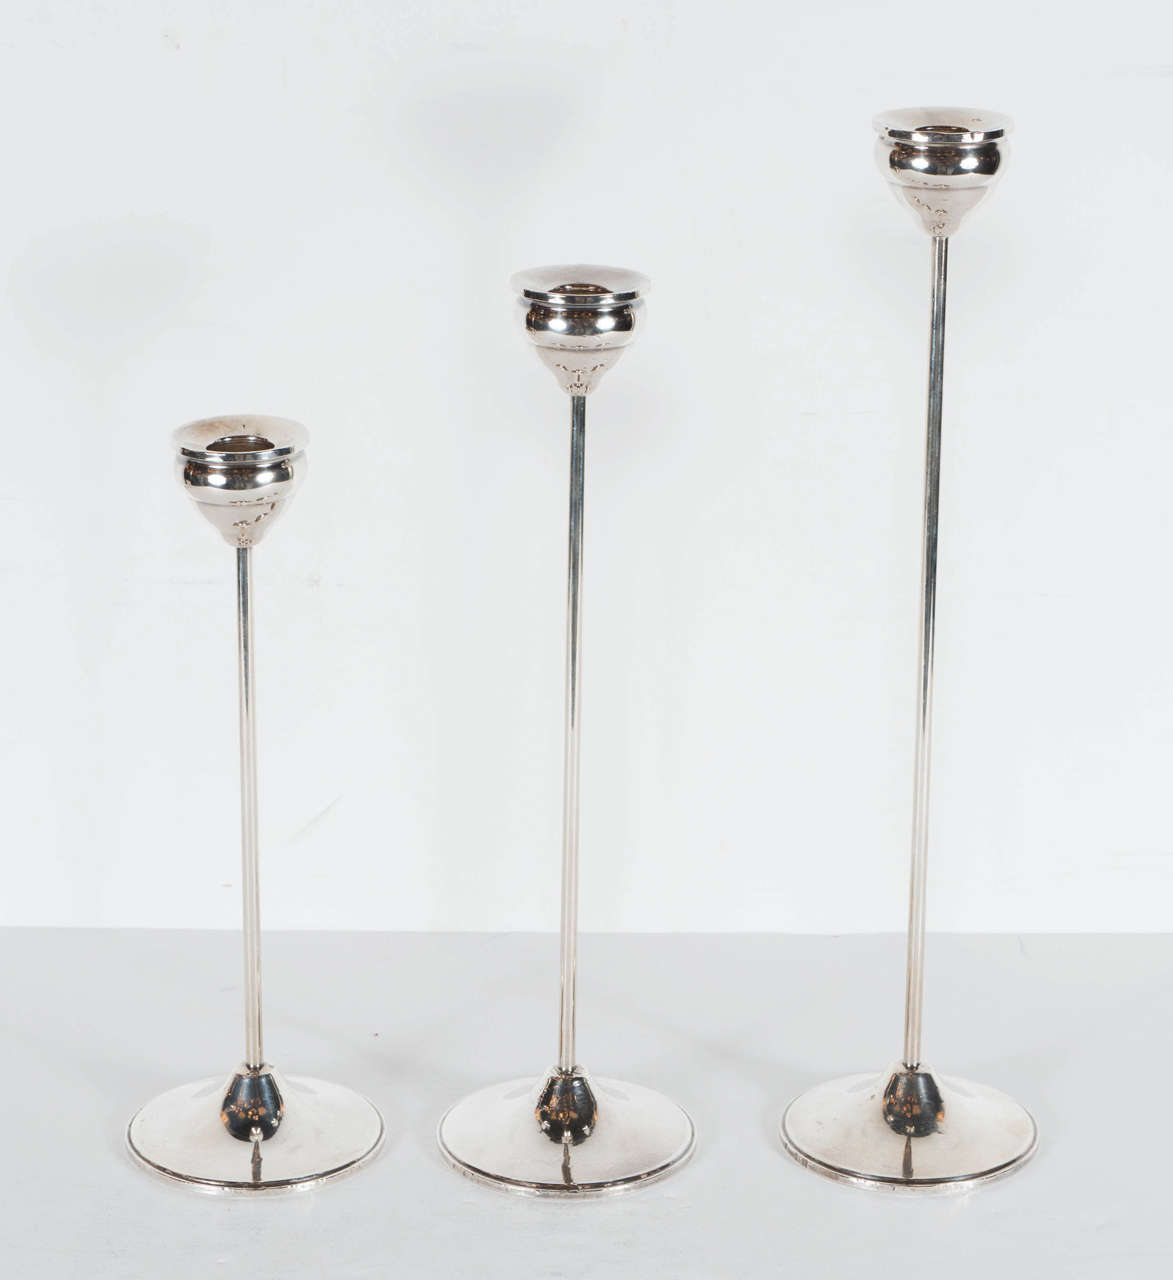 These candleholders feature a tapered columnar form with a stepped conical base with a tiered candle holder at the top. Great minimalist design and they are marked Sterling Duchin on the bottom